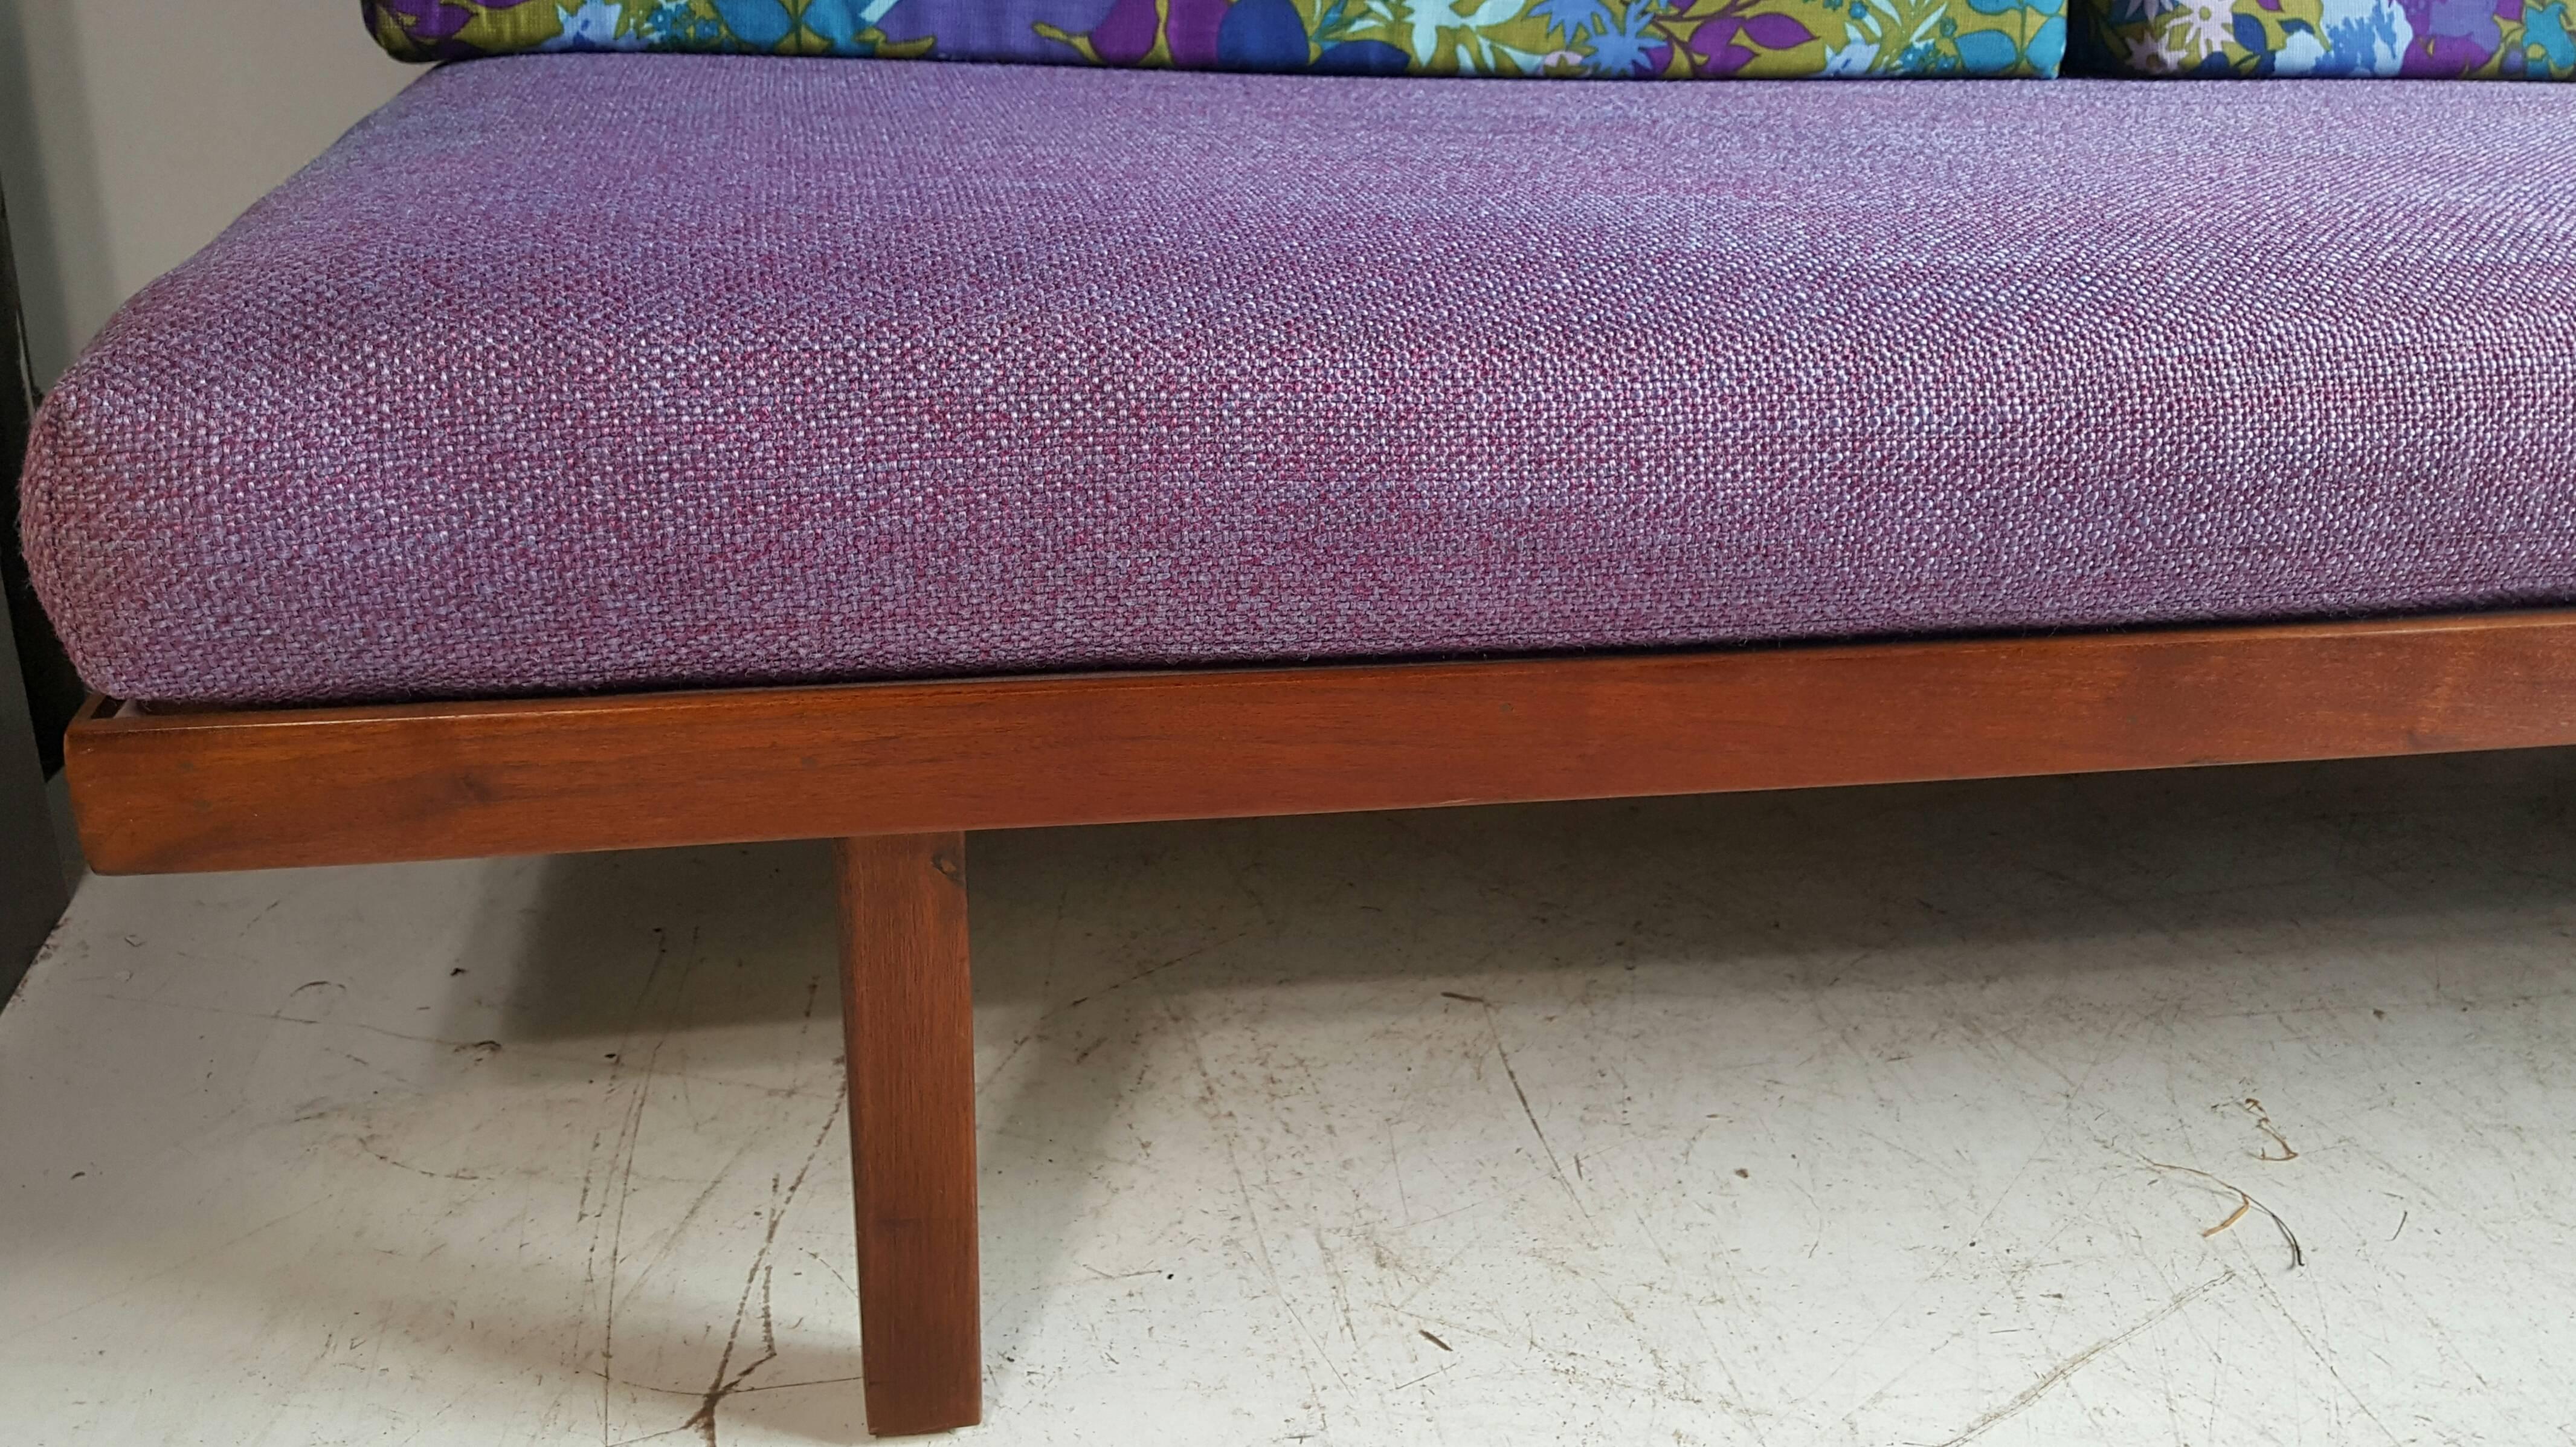 Mid-Century Modern daybed/sofa, George Nelson inspired, exceptional quality and construction, spring bed, retains original 1960s wool upholstery, extreamely comfortable and versatile.